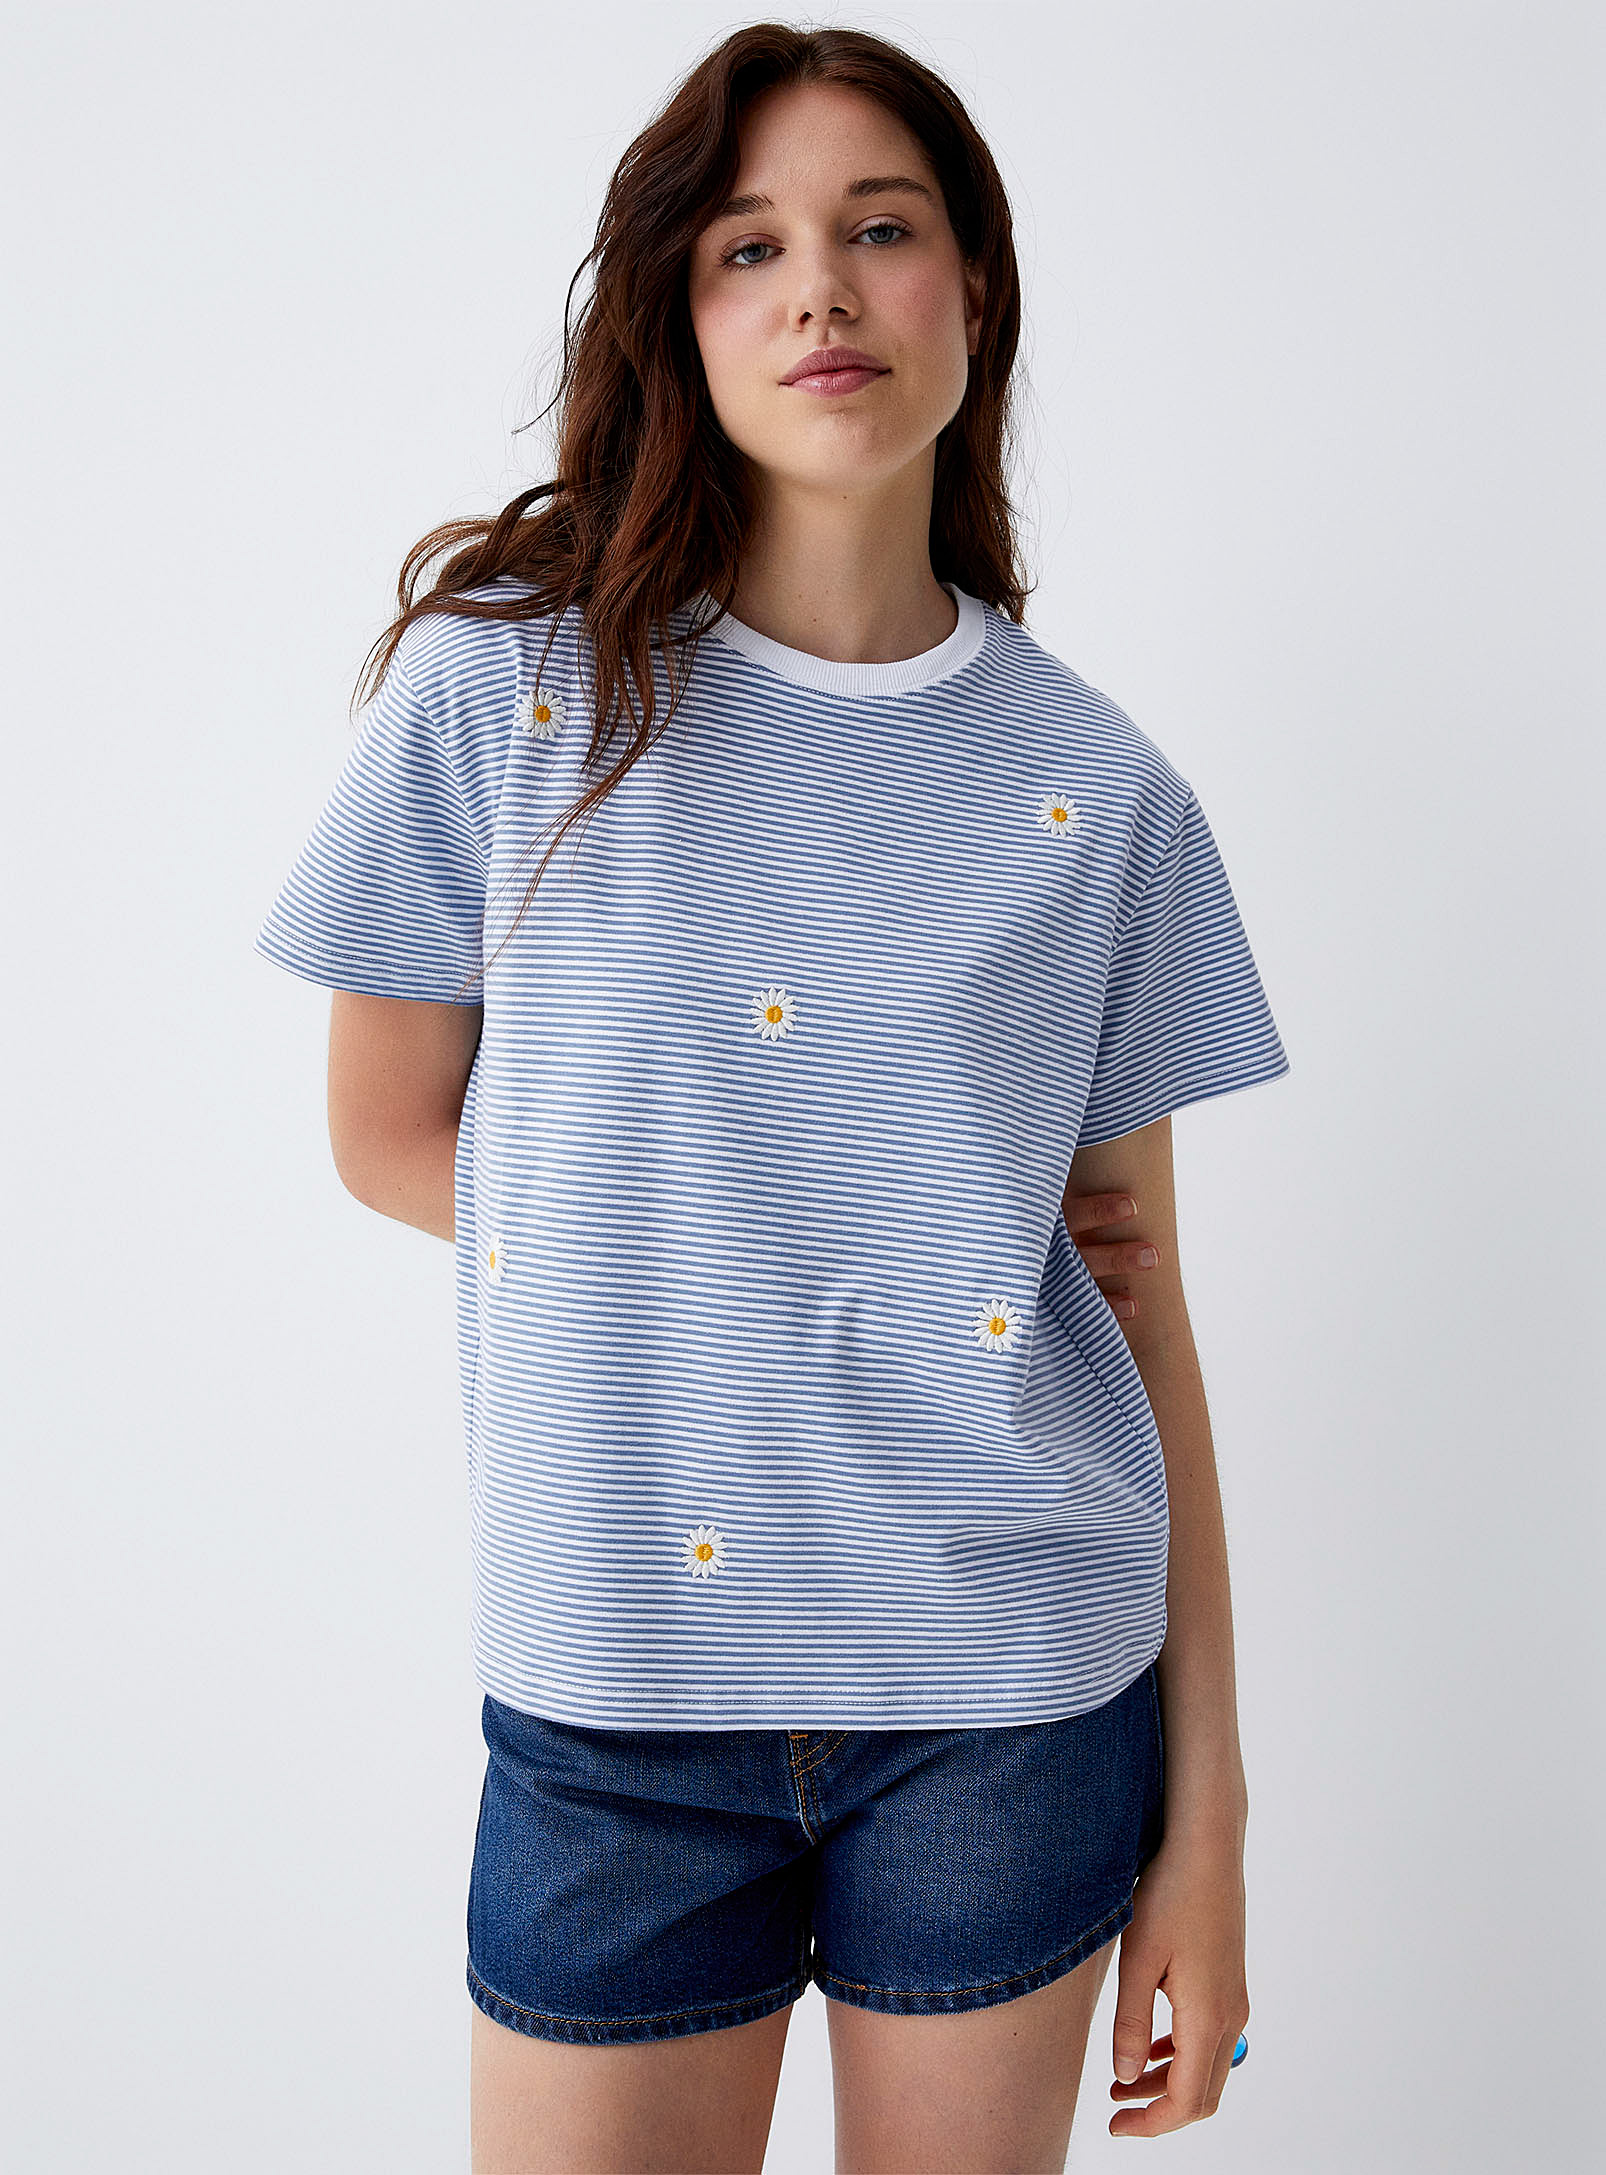 Things Between Daisies And Stripes T-shirt In Baby Blue